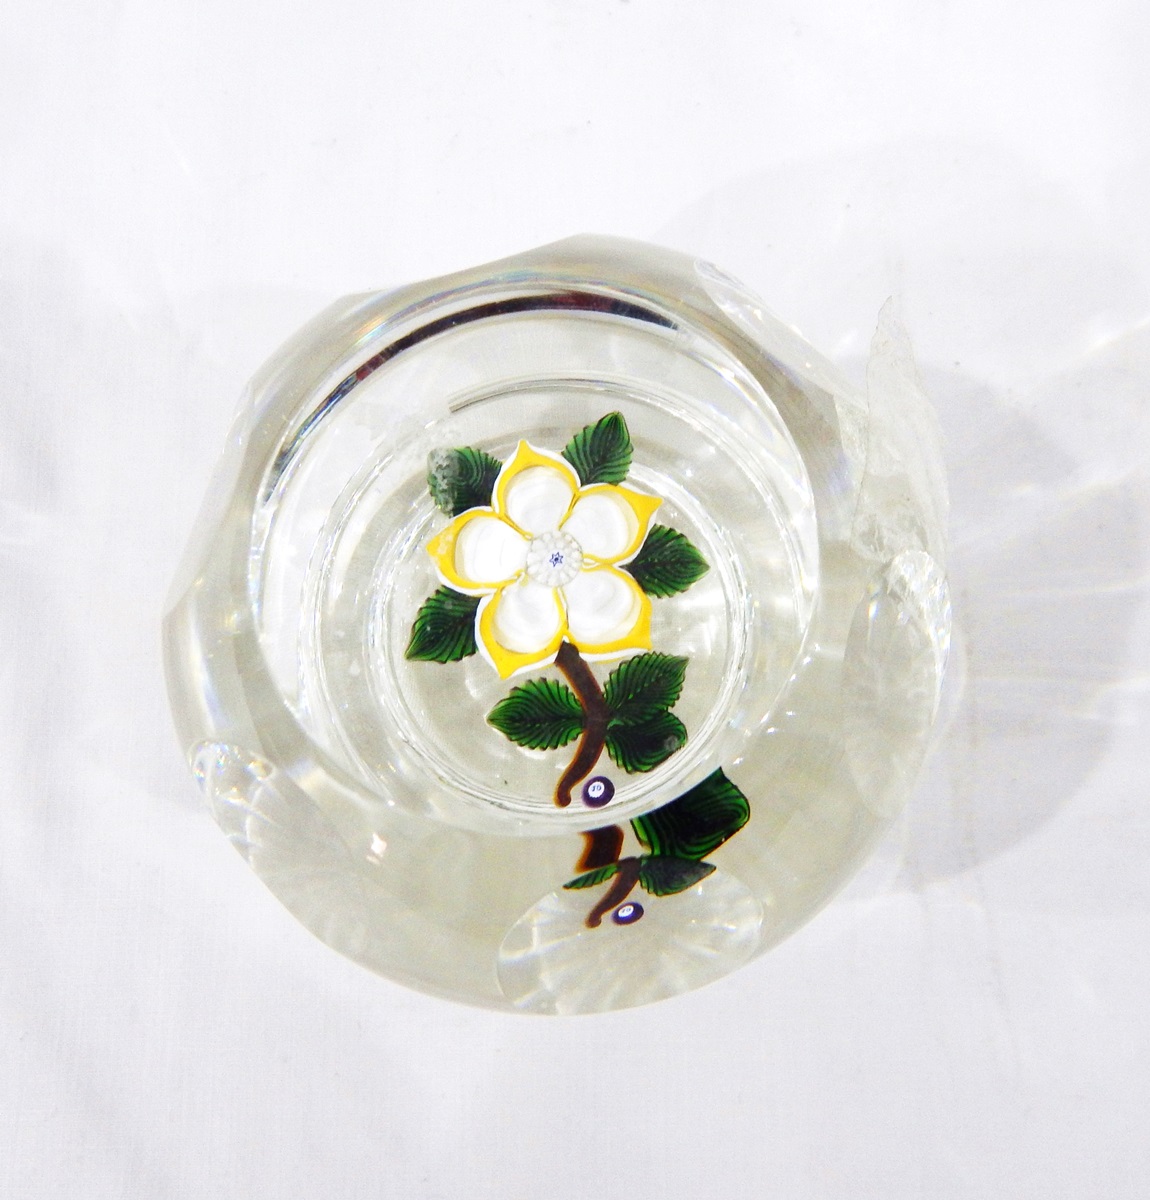 Glass paperweight by John Deacons, - Image 3 of 4